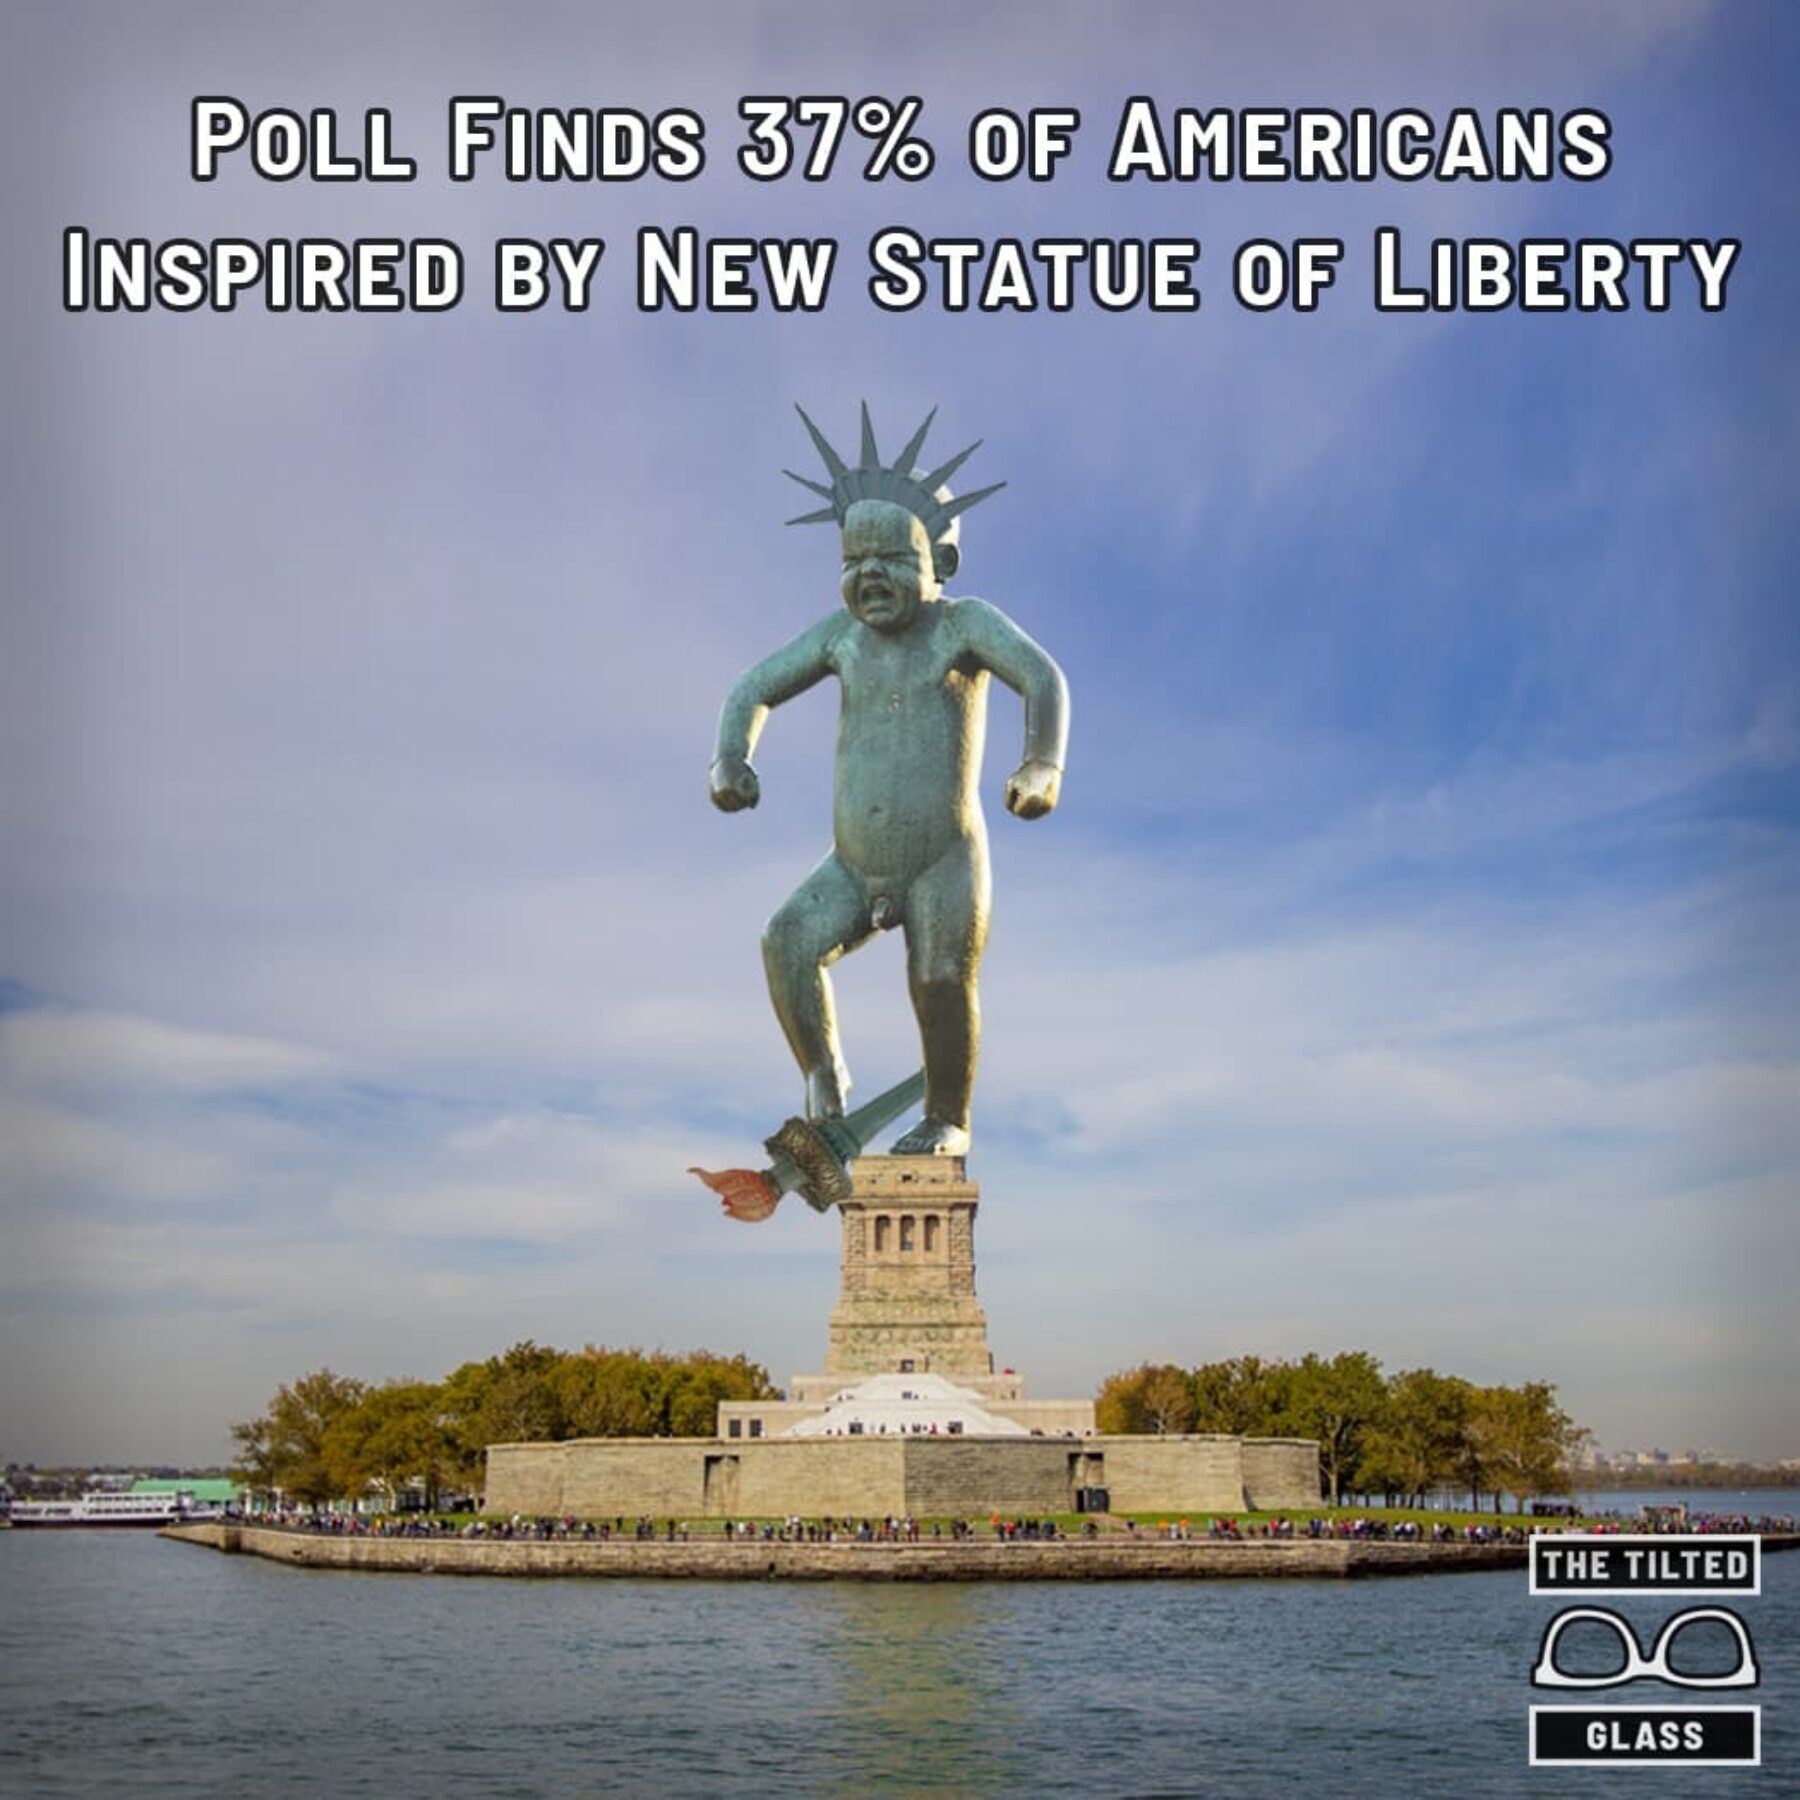 Poll Finds 37% of Americans Inspired by New Statue of Liberty